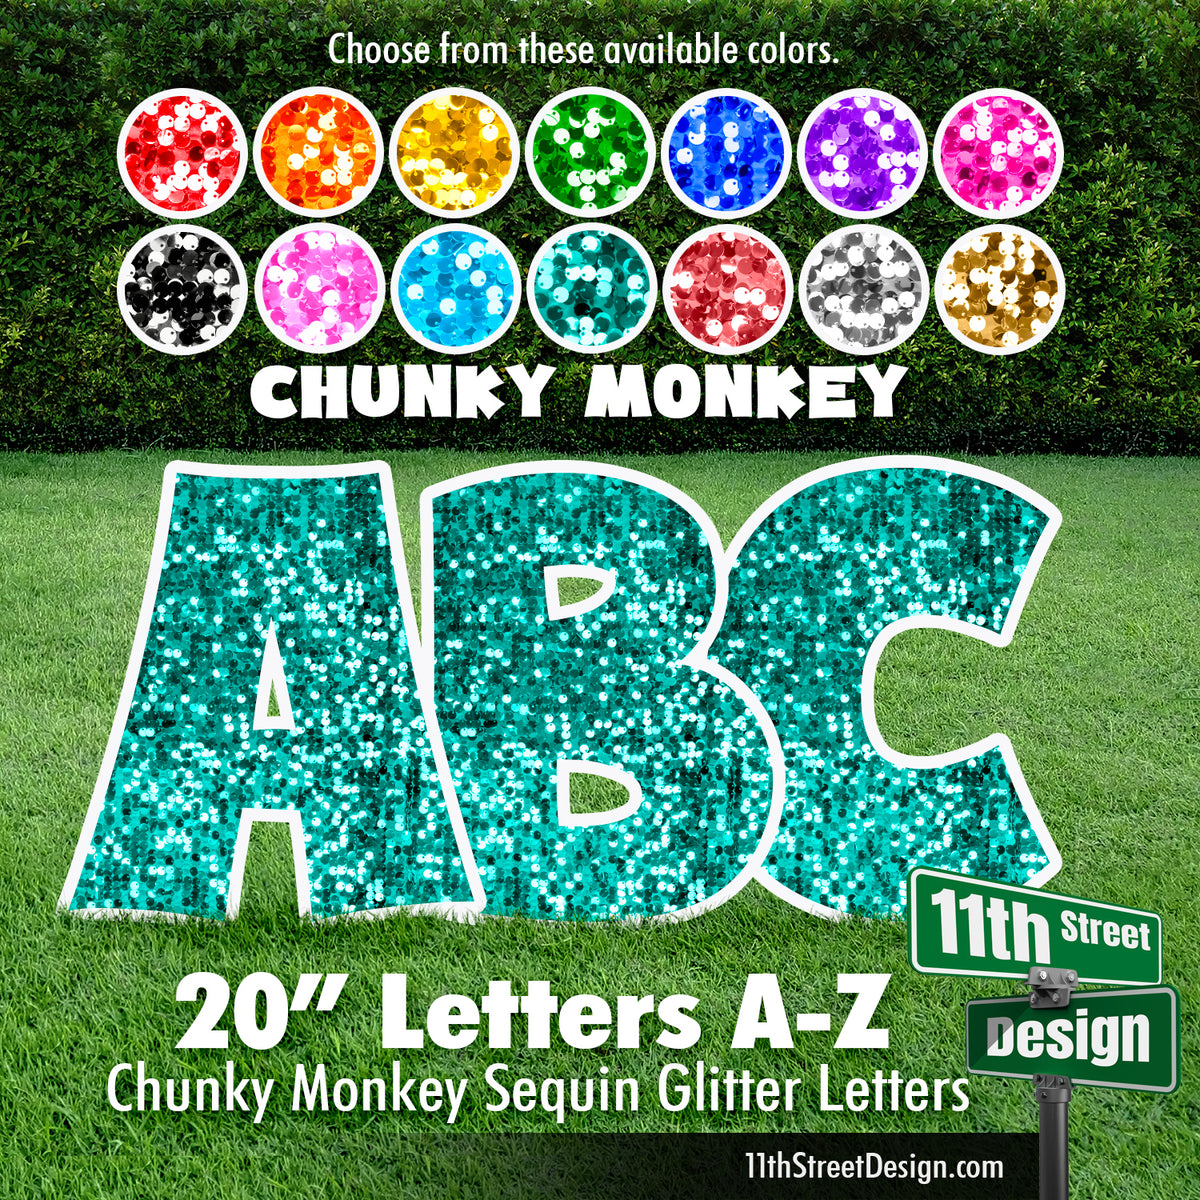 Sequin Glitter 20&quot; Chunky Monkey 26 Letter Alphabet Yard Card Set Includes Letters A-Z